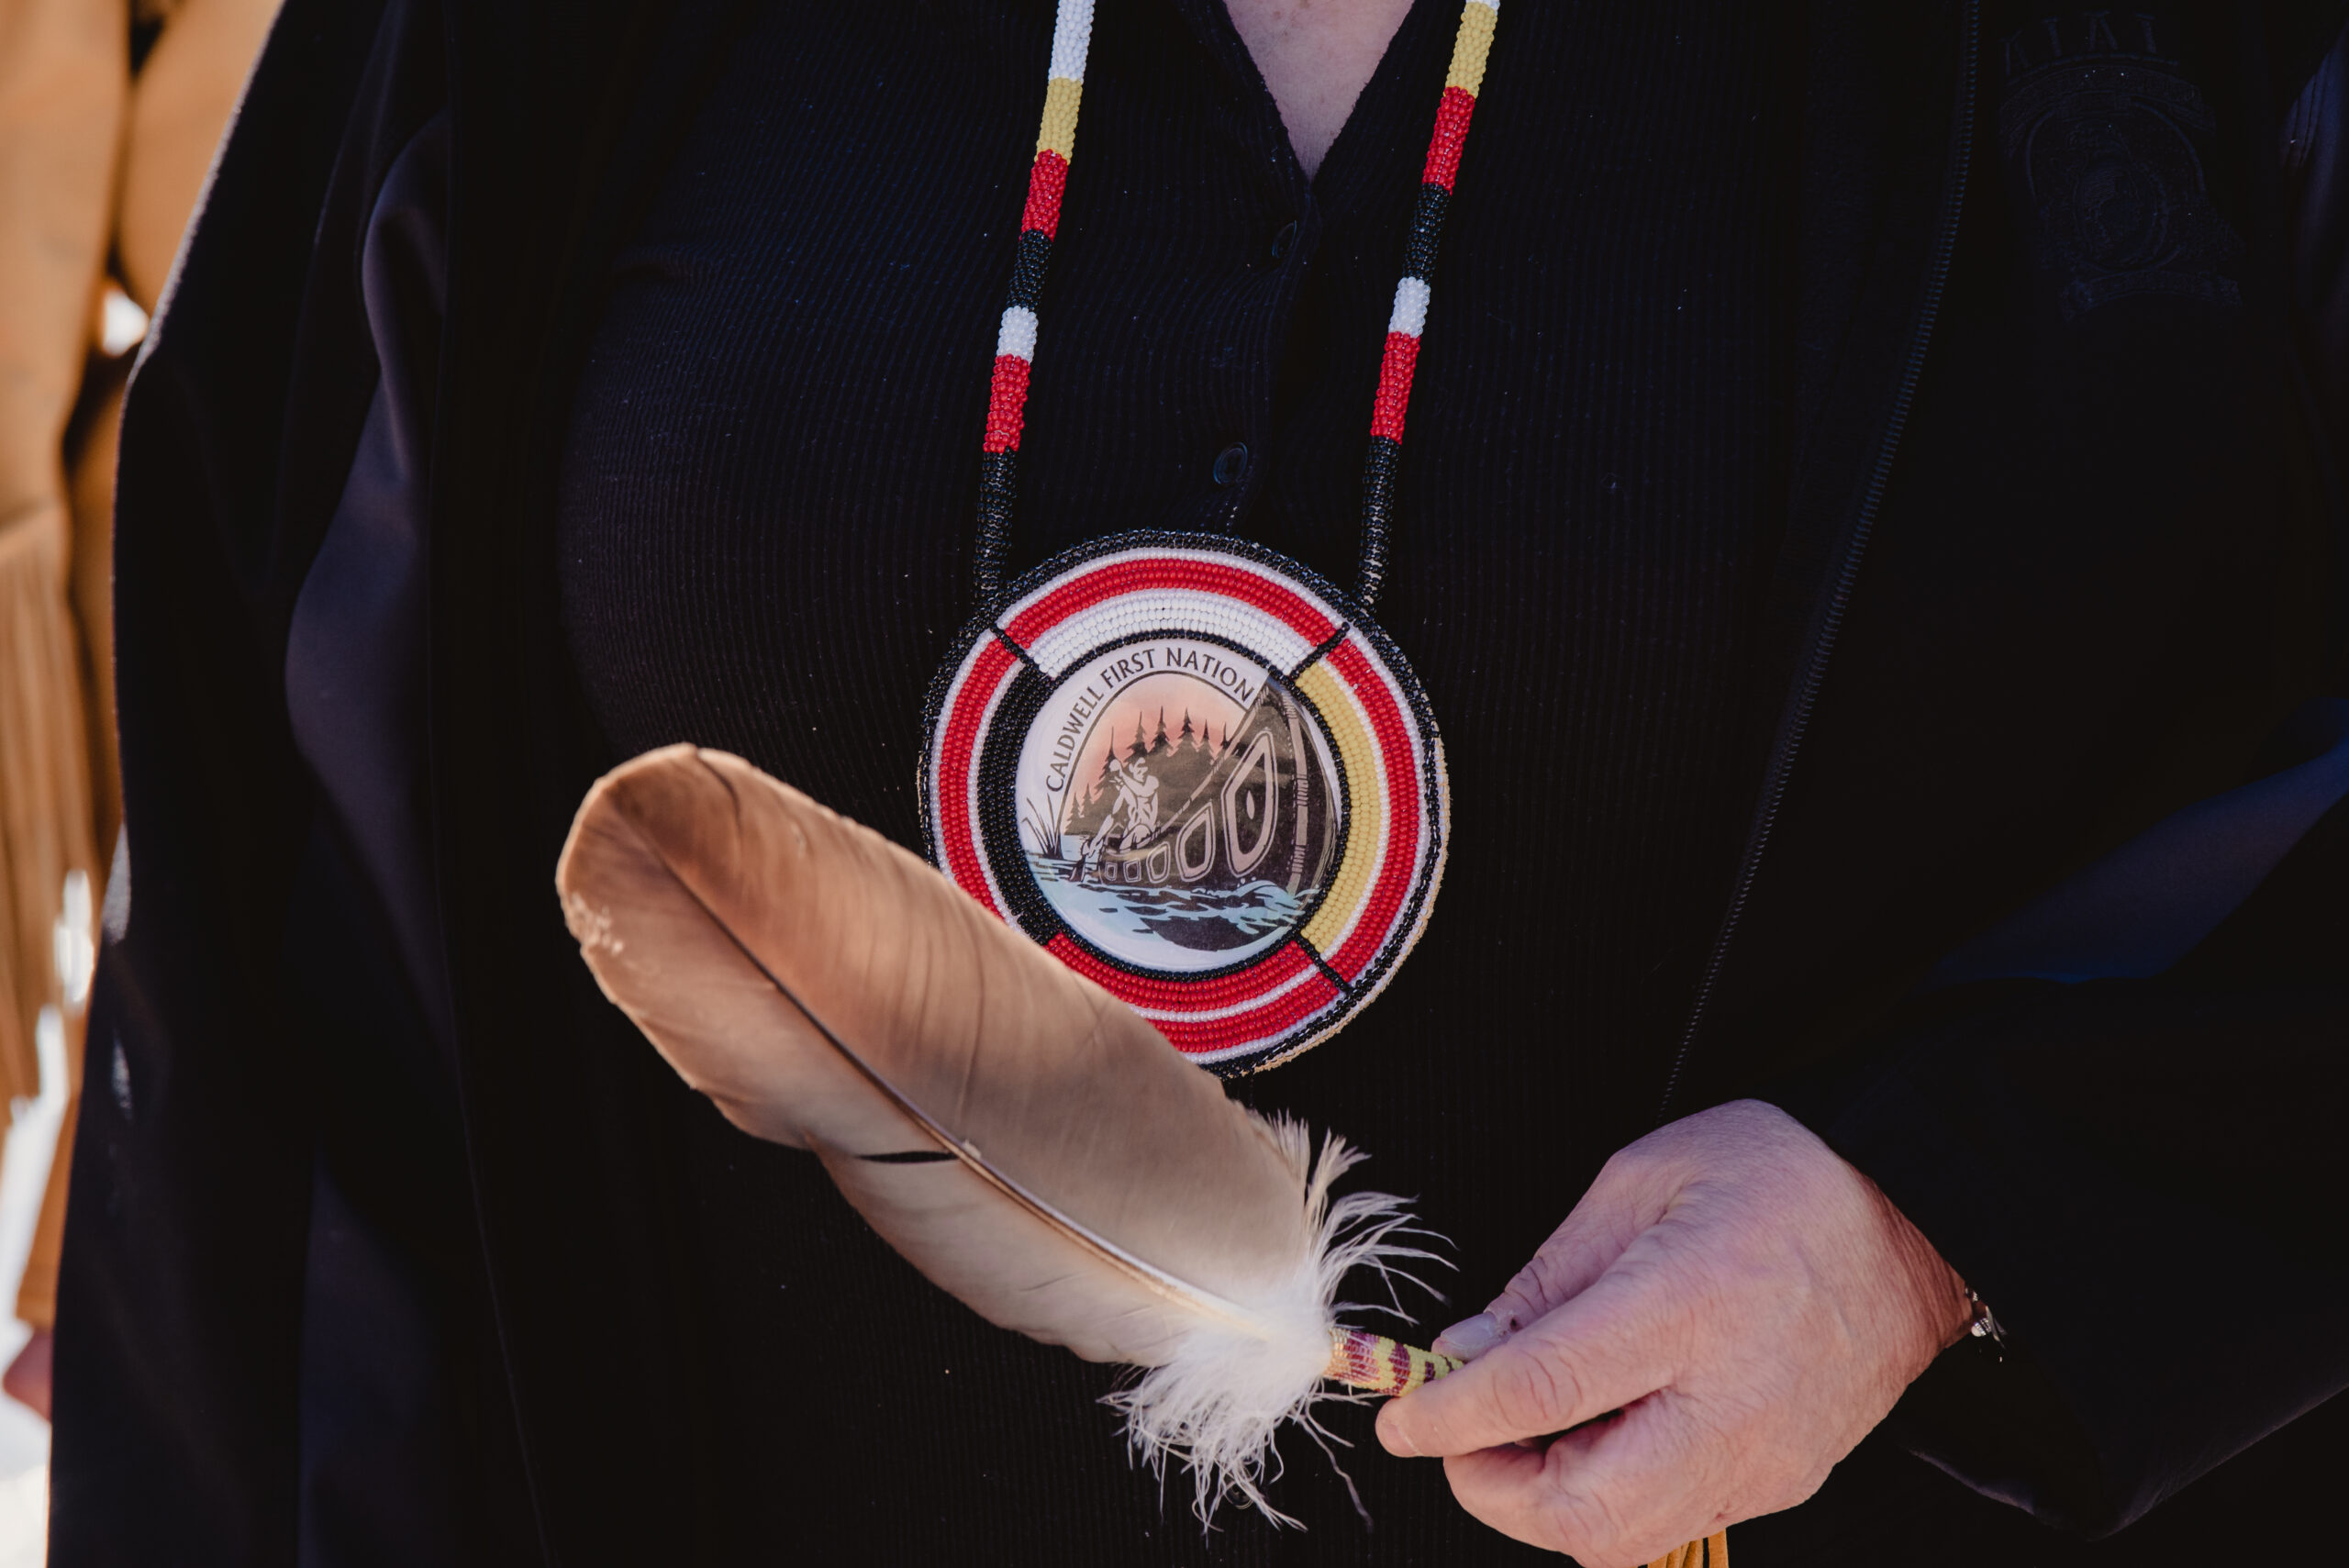 A woman holds an eagle feather in her hand, in front of her black shirt and a Caldwell First Nation badge.